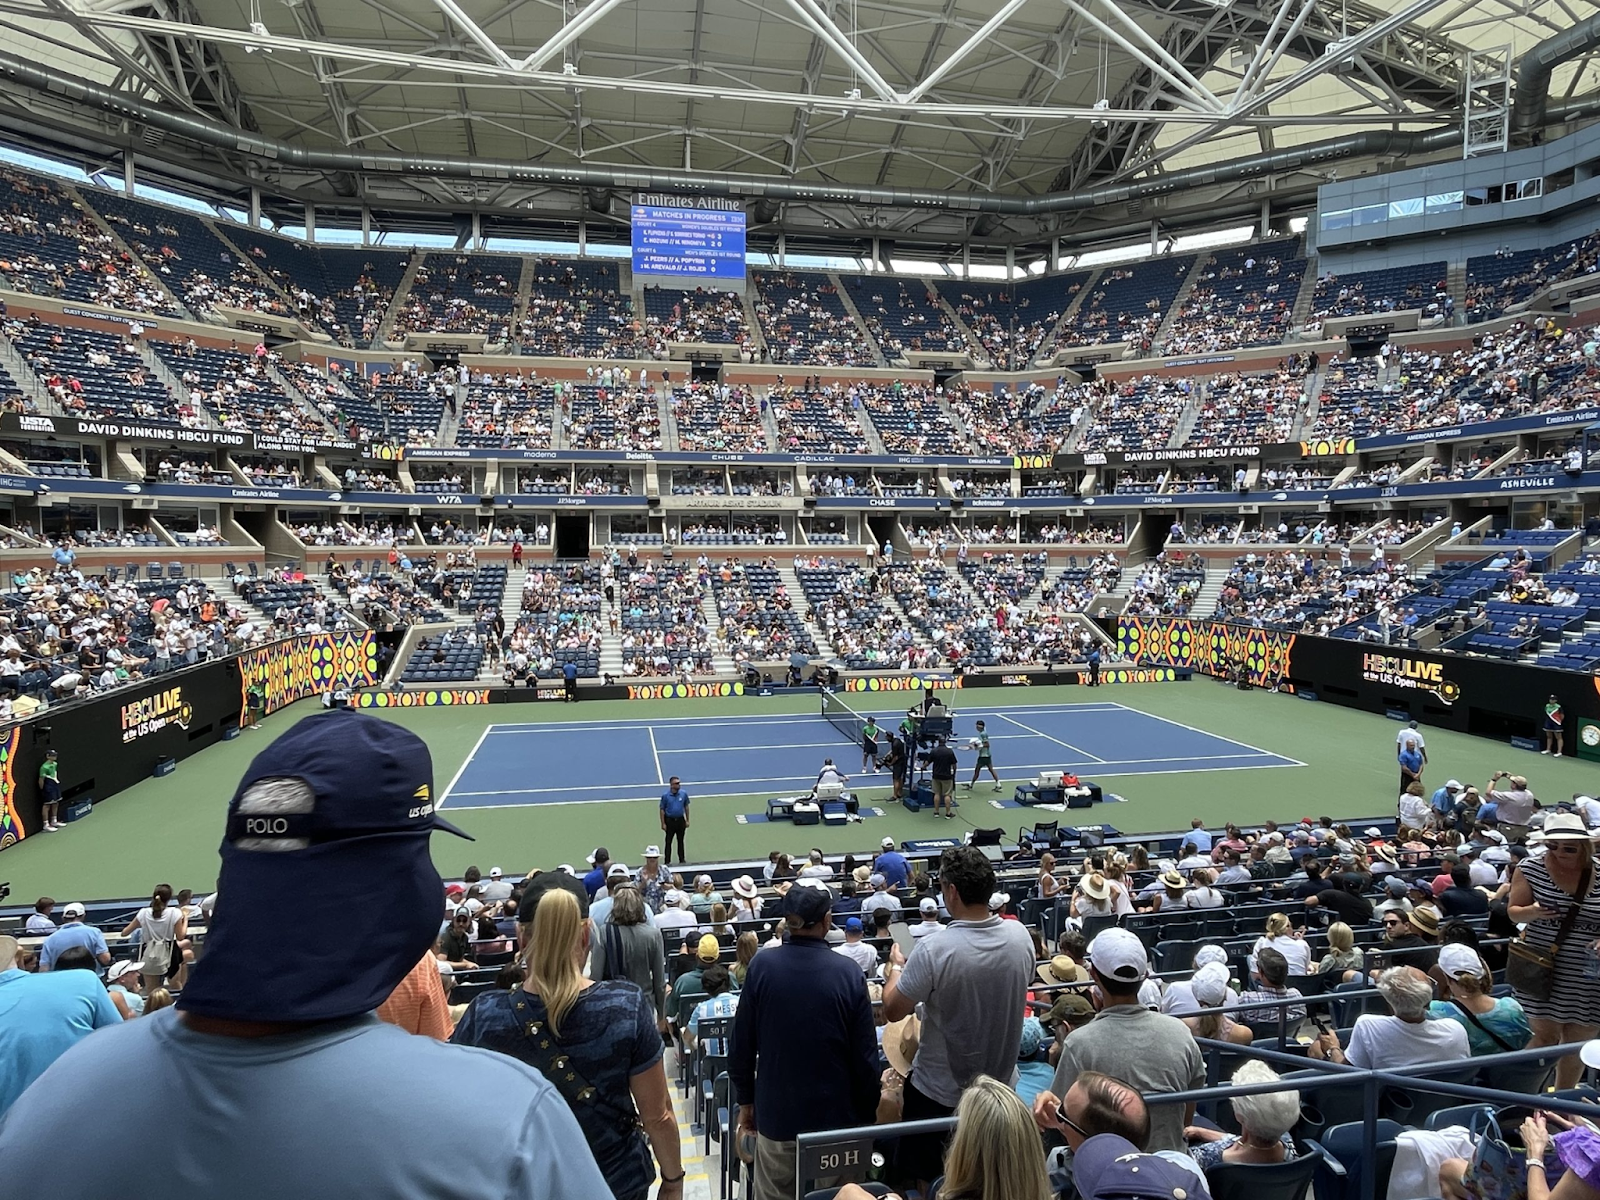 Live From US Open 2022: USTA Offers Seamless In-Venue Experience Across Sprawling Campus: During the US Open, the USTA Billie Jean